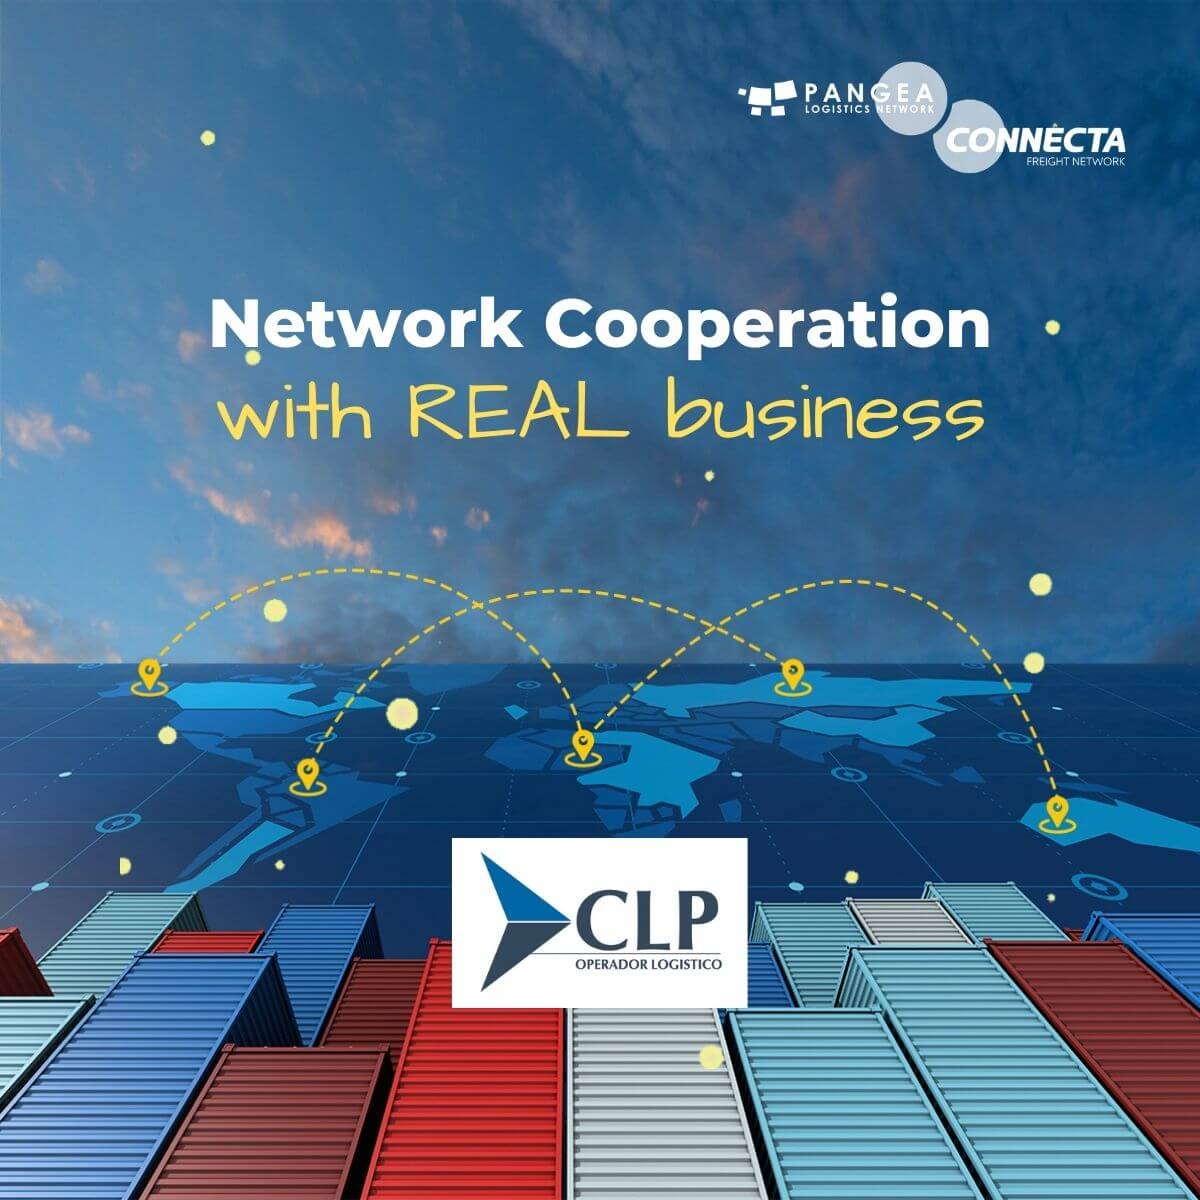 CLP CARGO Y ADUANAS (Peru) network cooperation with real business